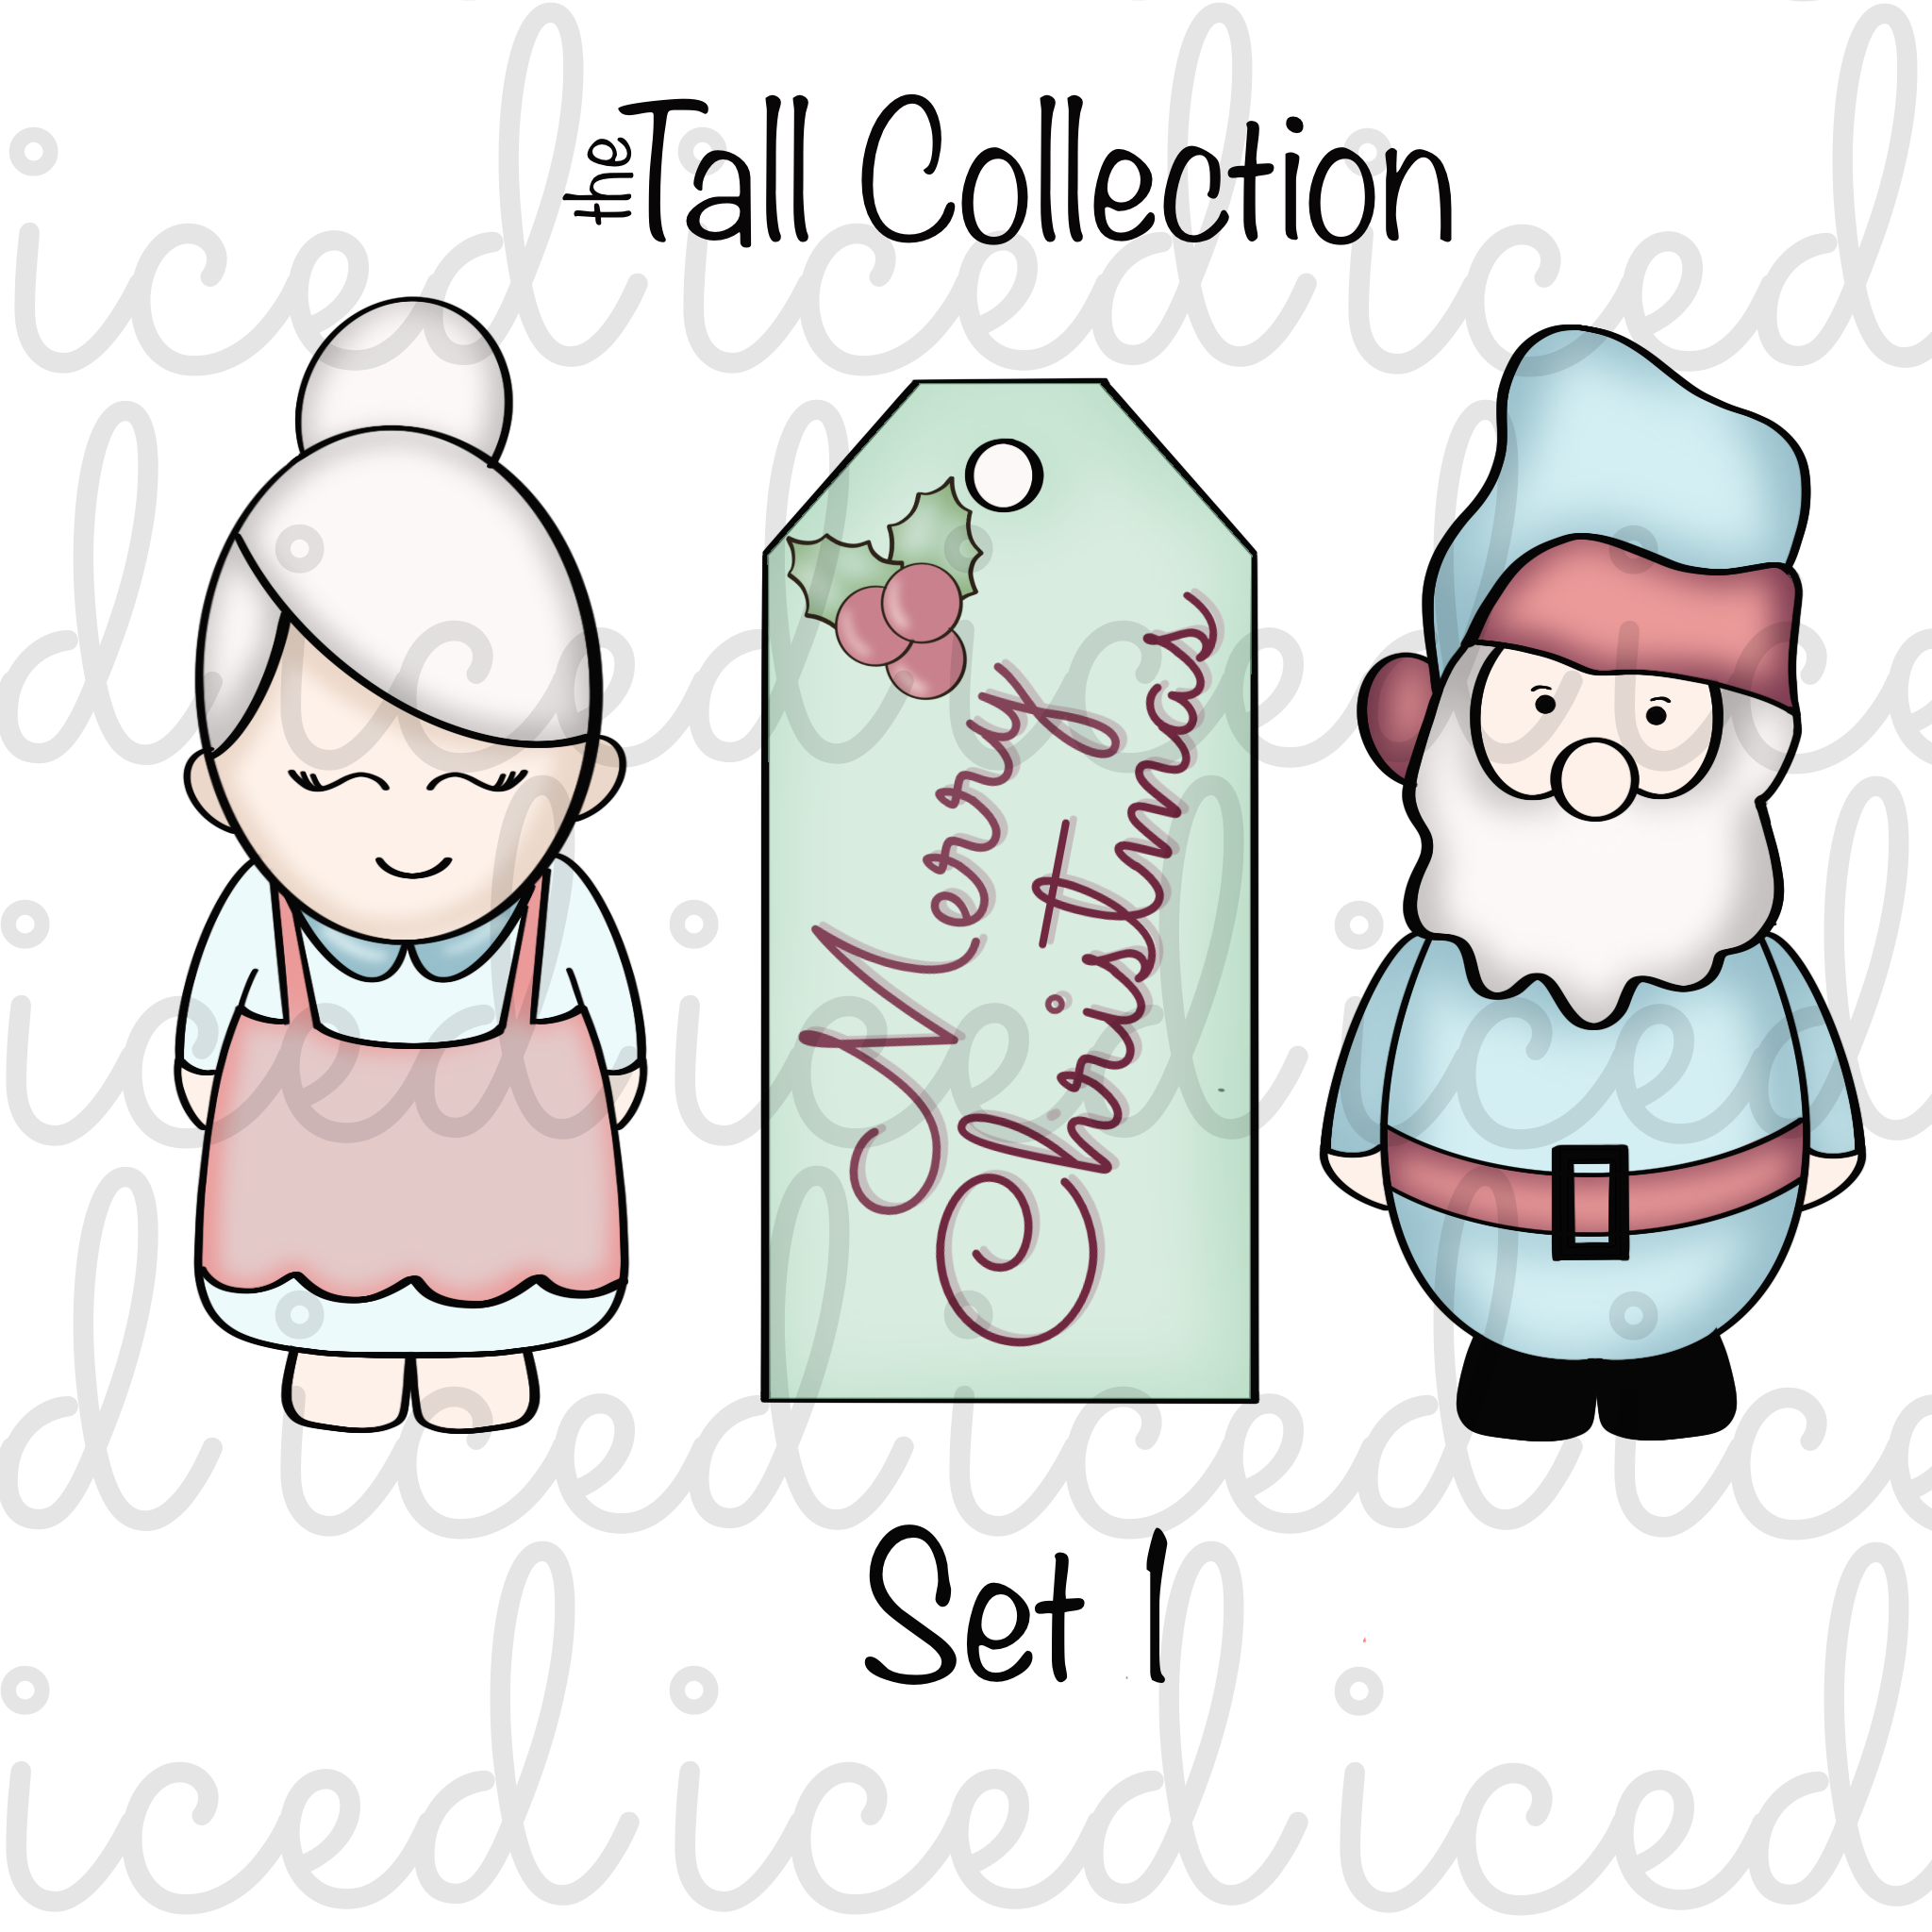 The Tall Collection - Set 1